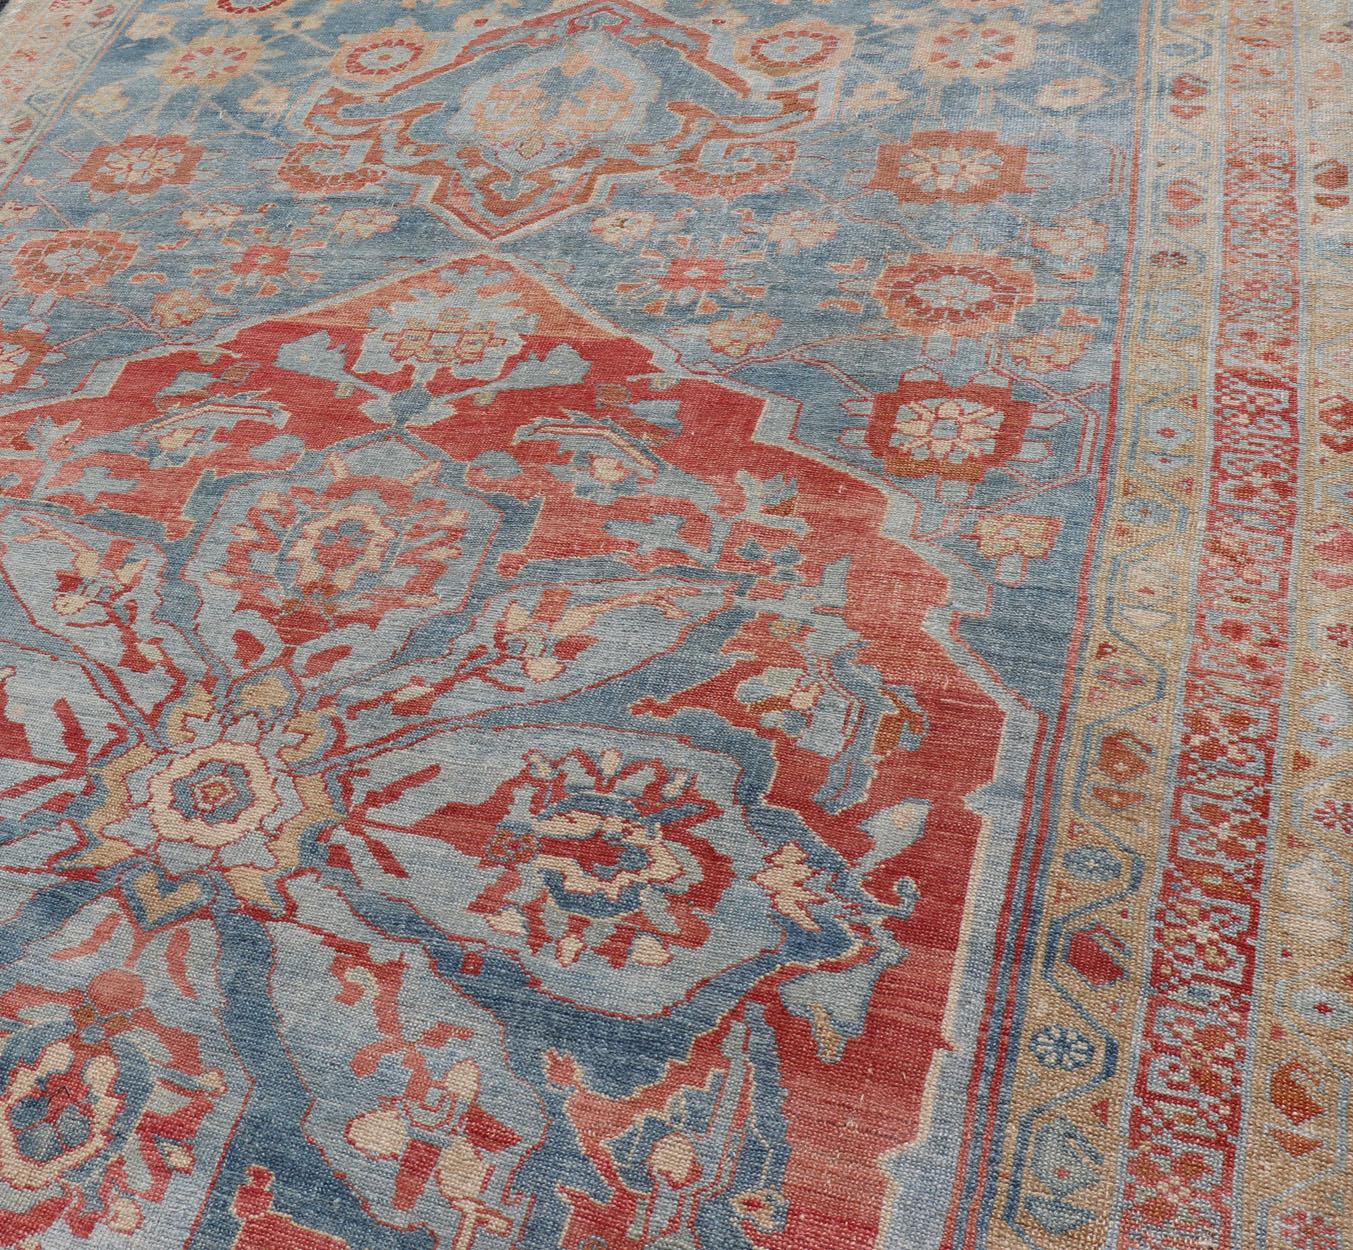 This fine antique tribal Persian Veramin rug features a floral design accentuated by a large medallion design at its center. Enclosed within a complementary, multi-tiered border, and rendered in blue, red, orange, cream and ivory tones; this rug is